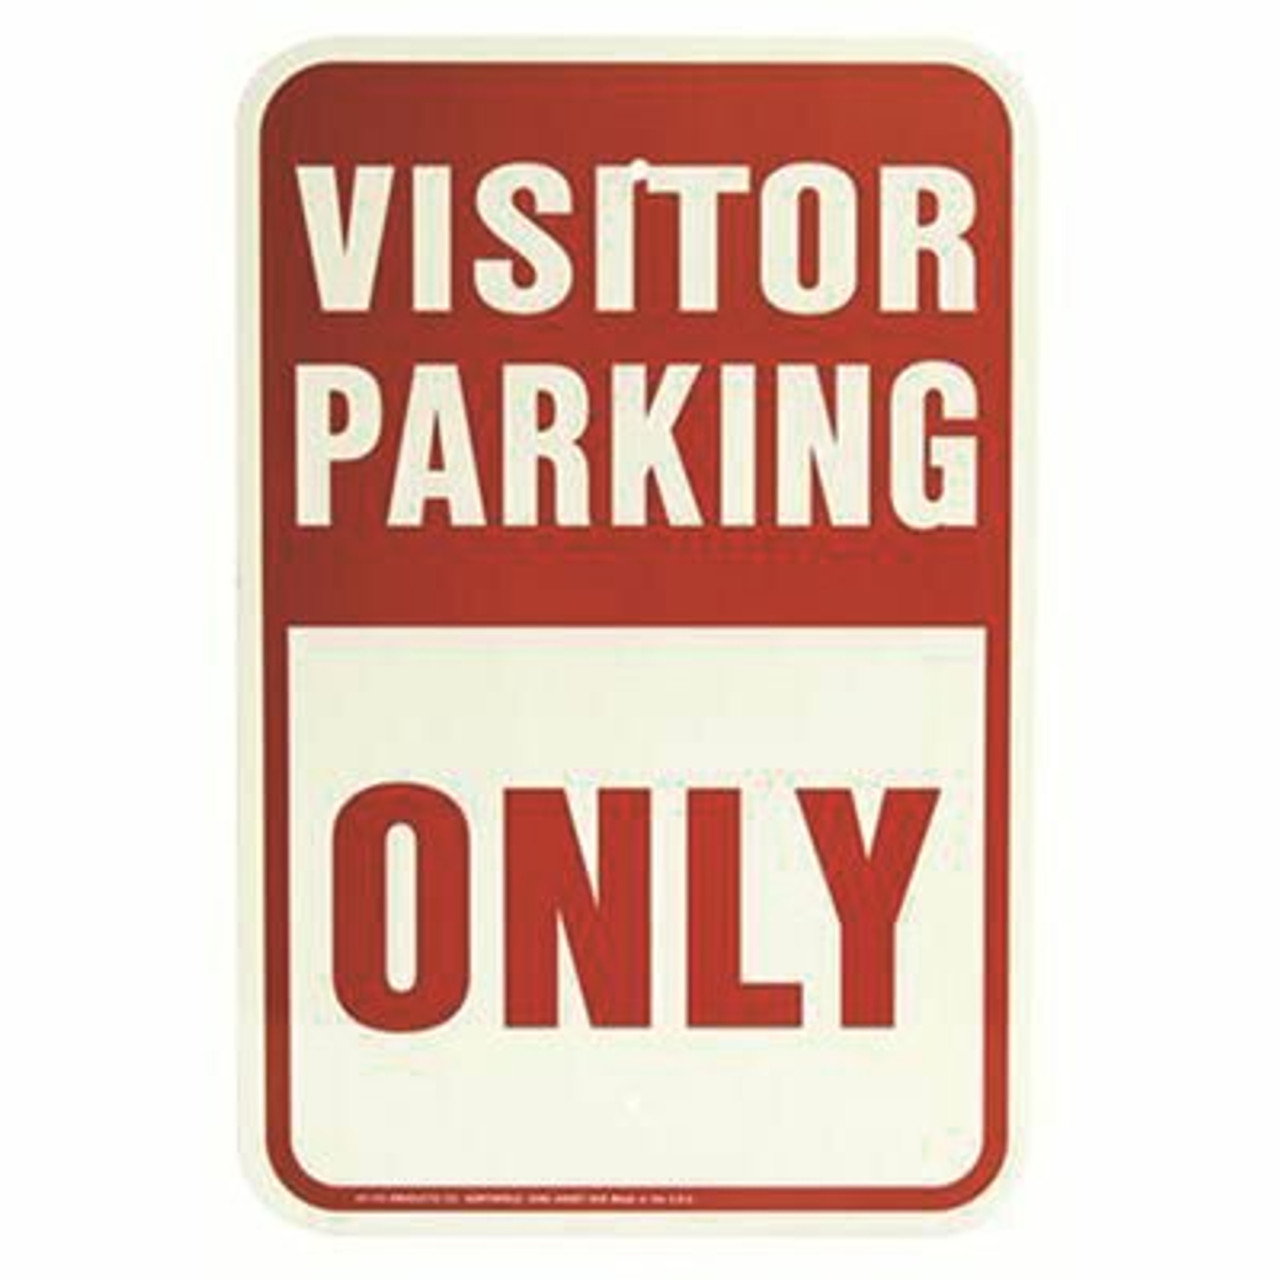 Hy-Ko 12 In. X 18 In. Aluminum Visitor Parking Only Street Sign